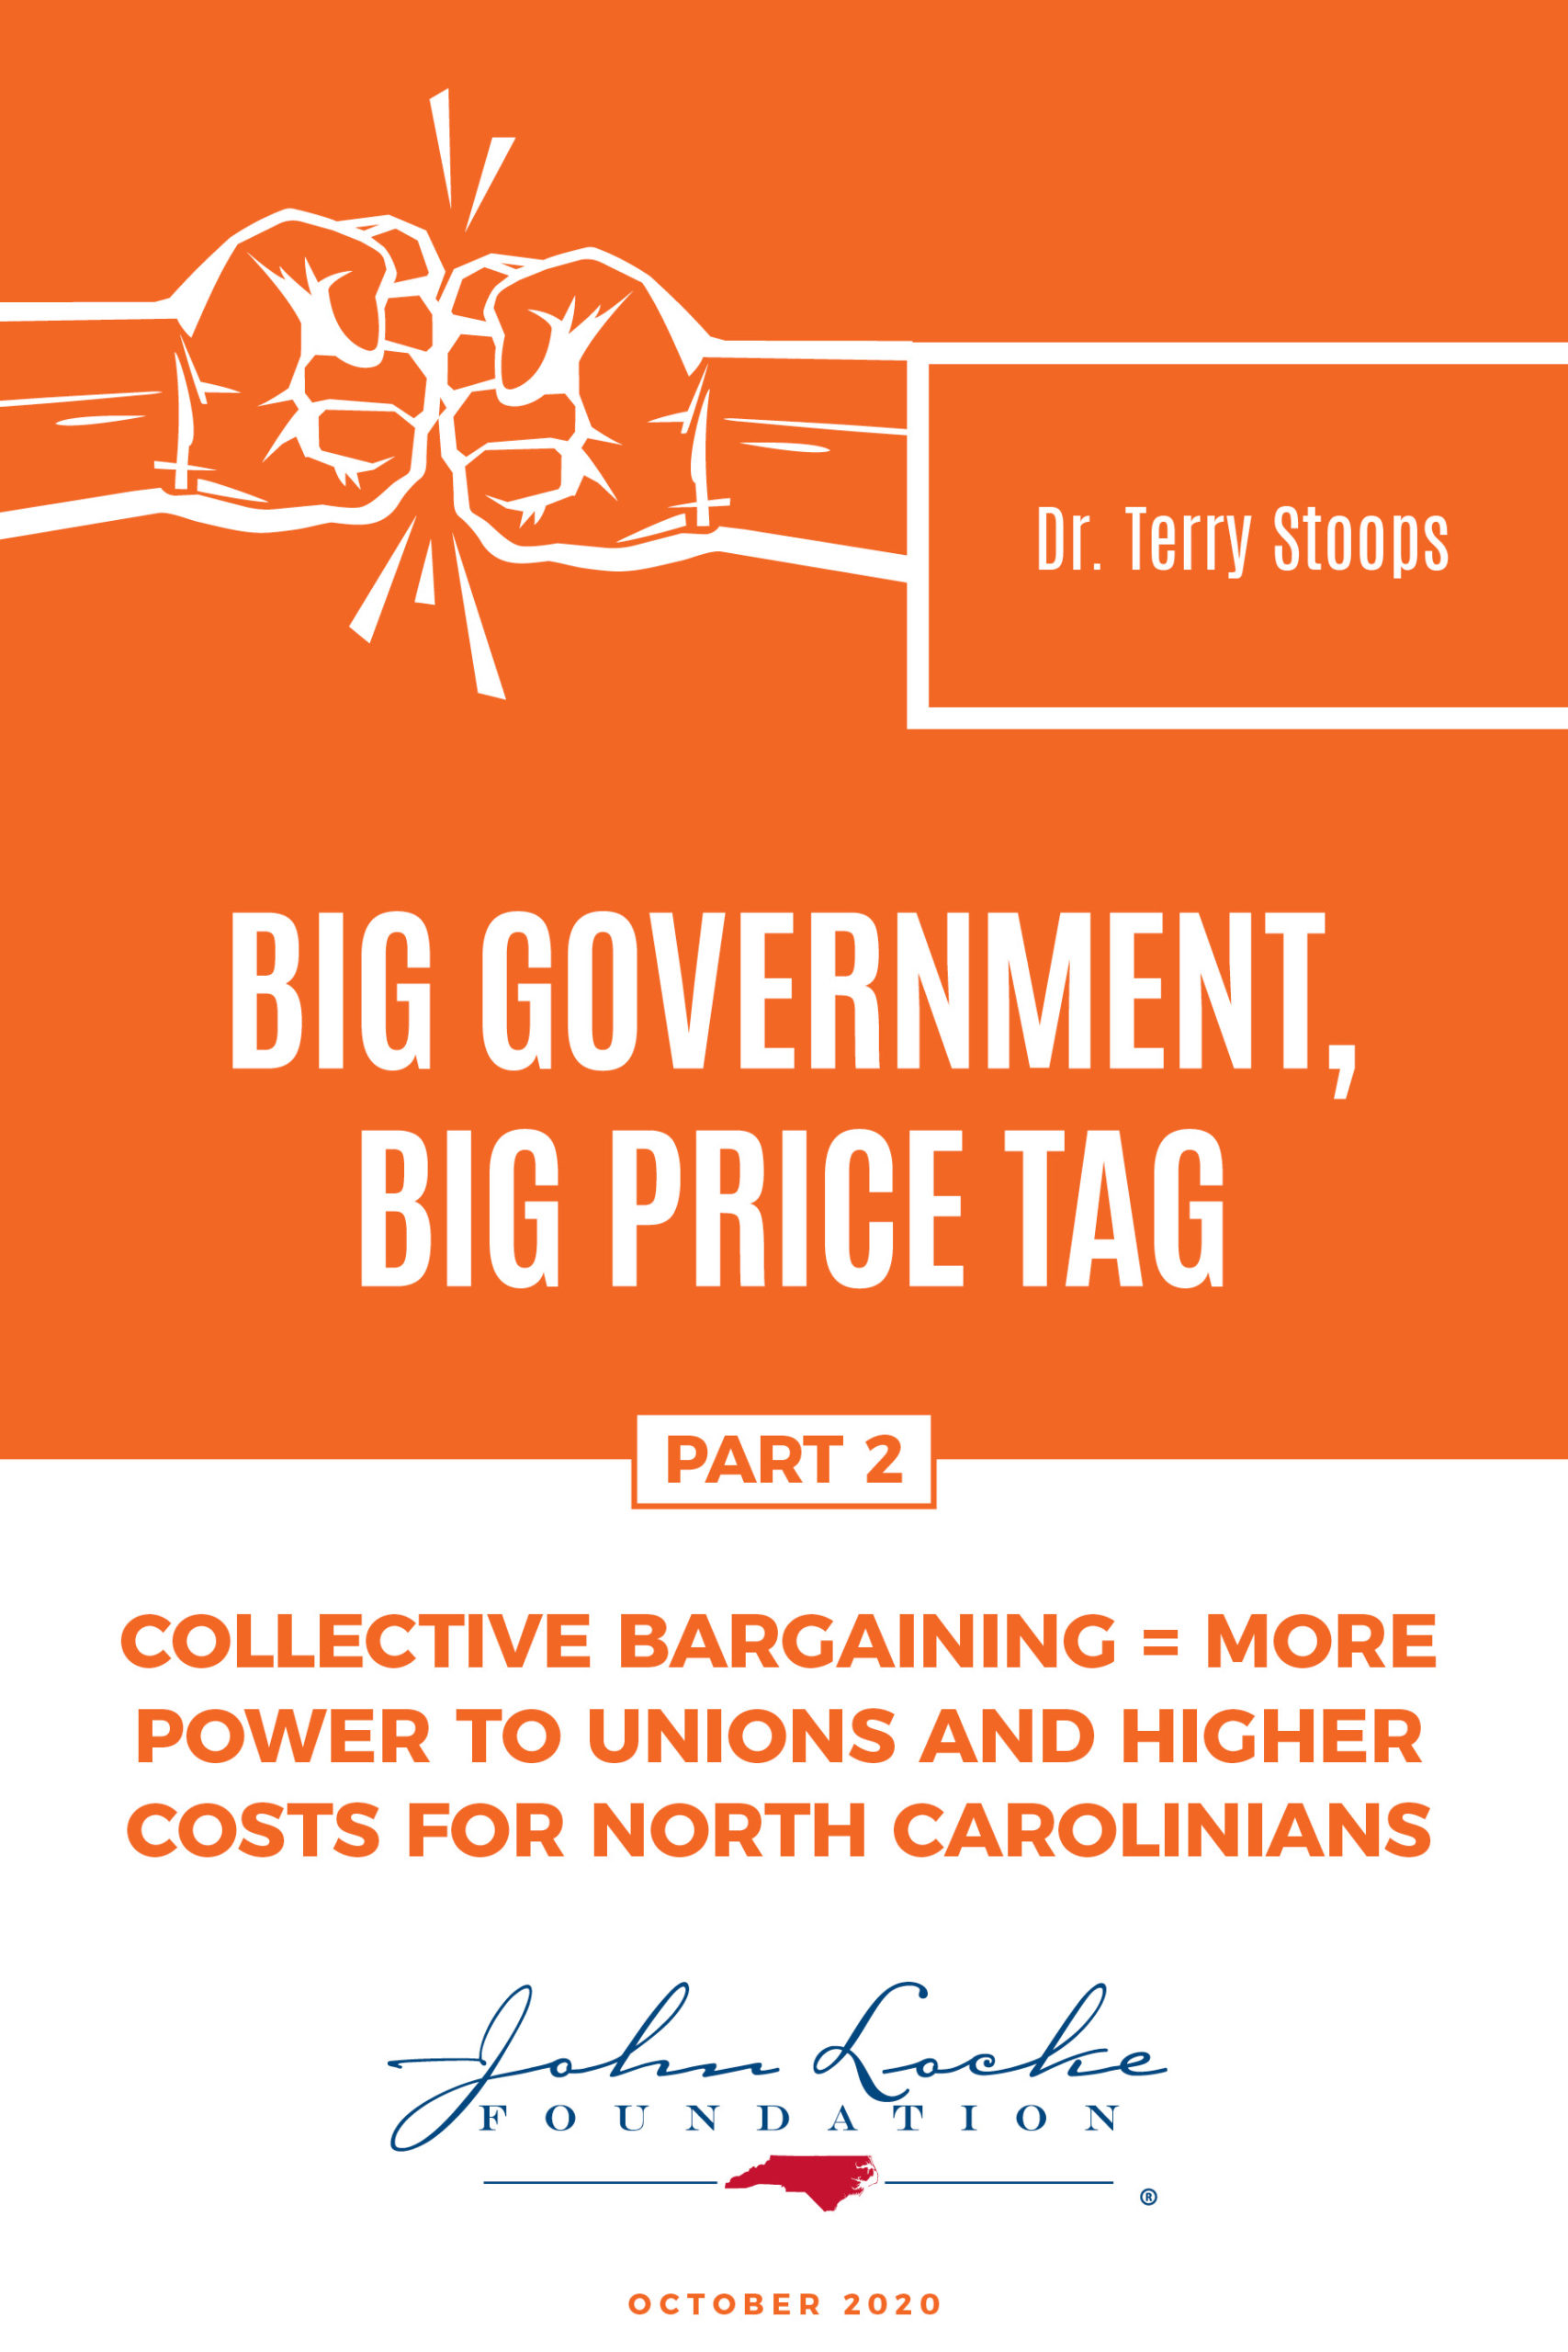 Collective Bargaining = More power to unions and higher costs for North Carolinians